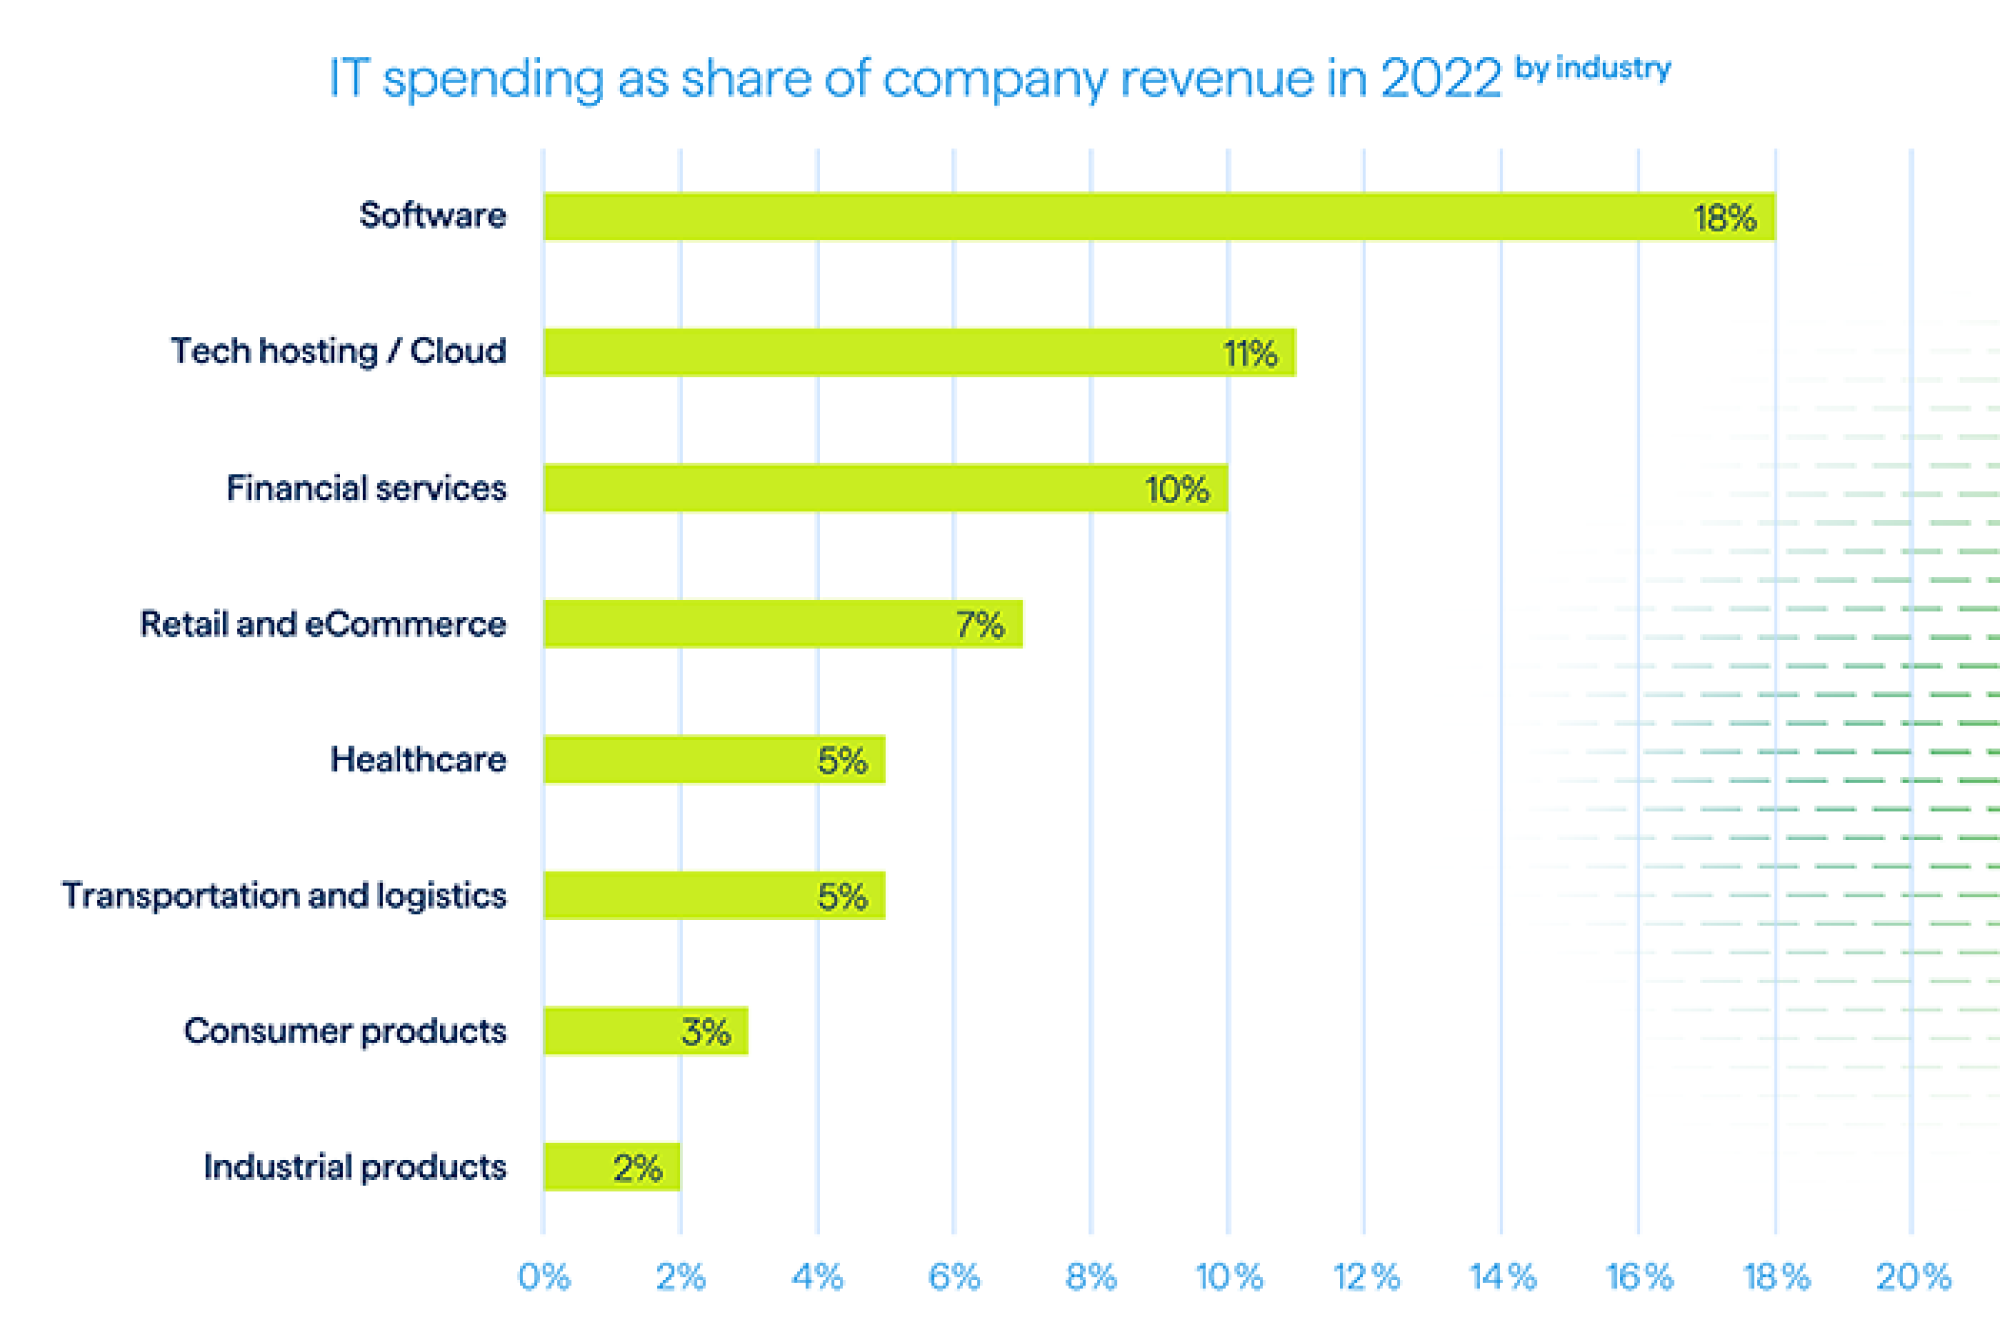 chart of IT spending as share of company revenue in 2022 by industry